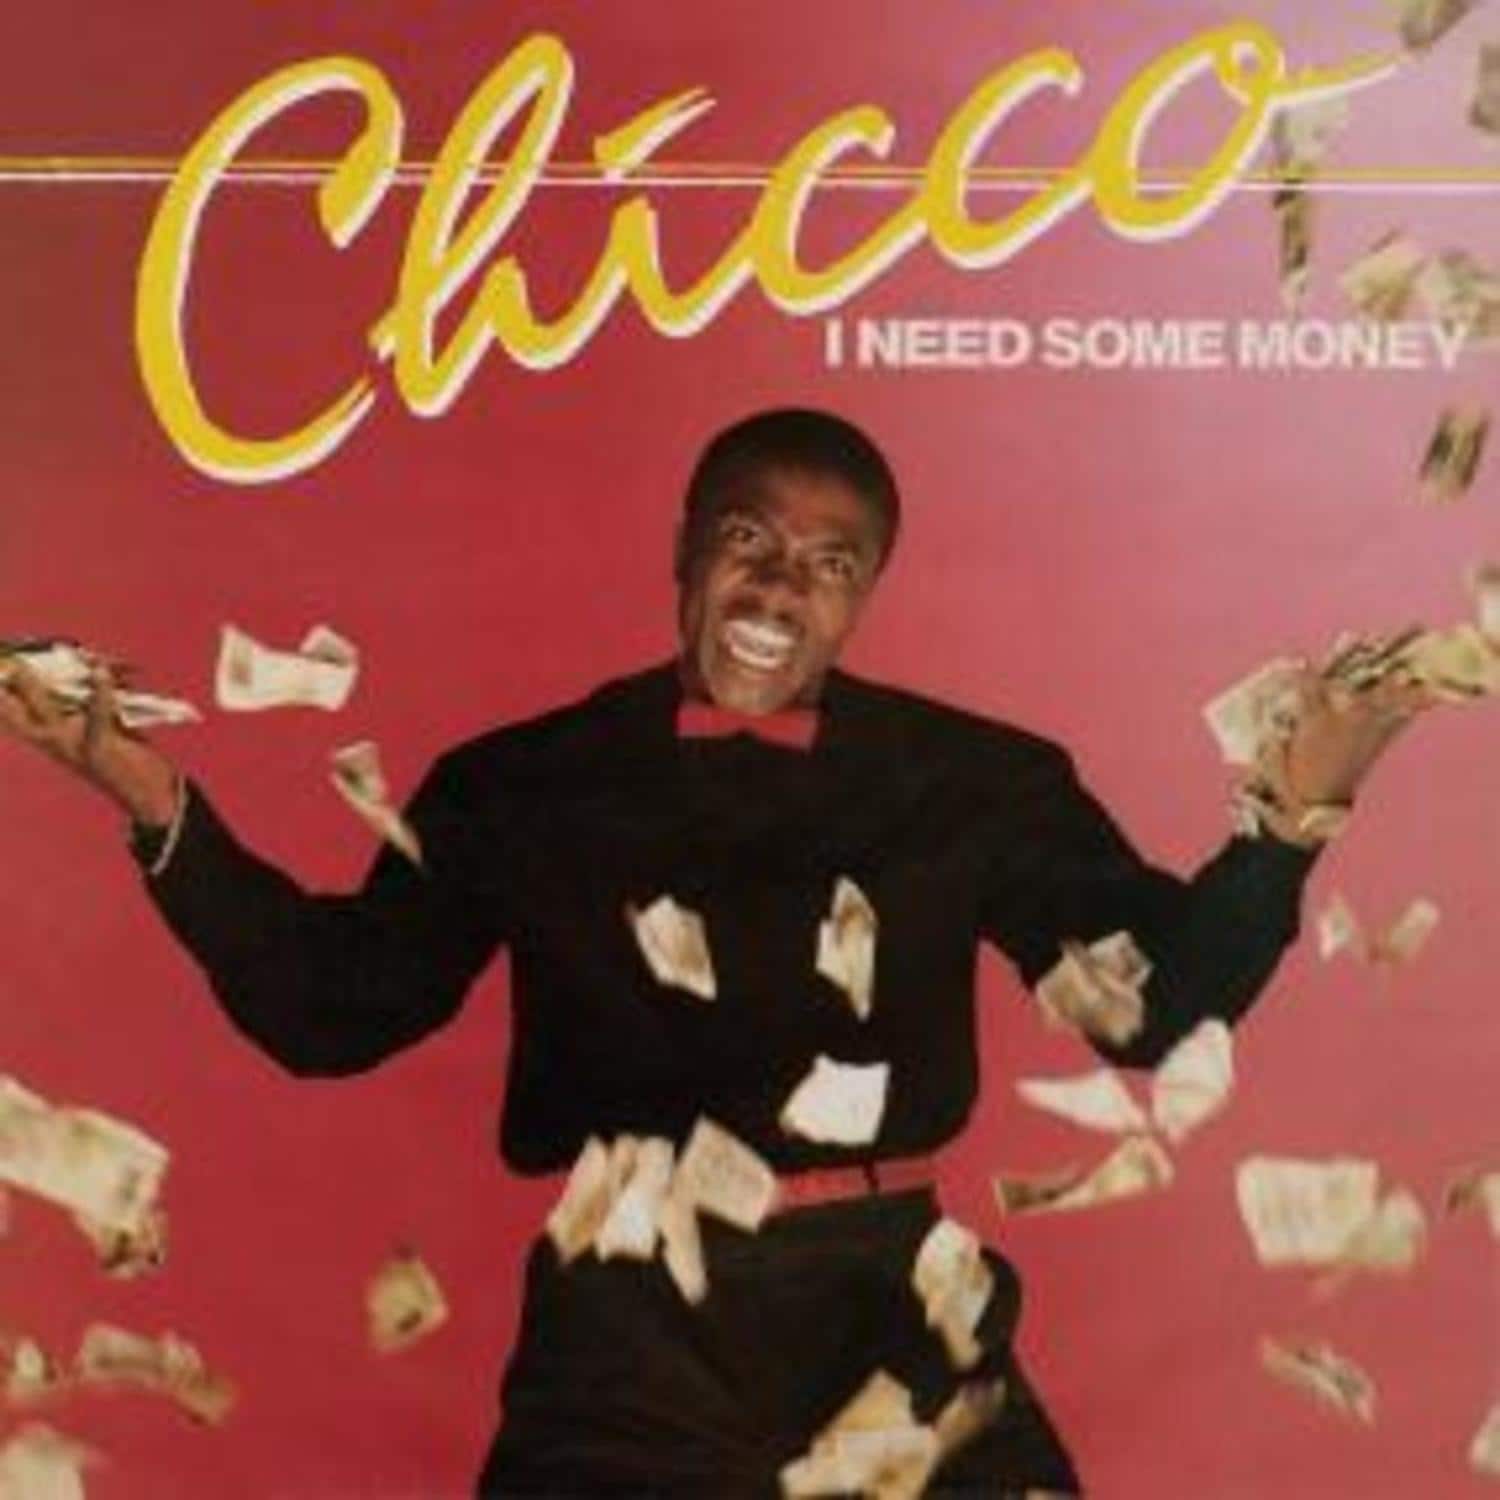 Chicco - I NEED SOME MONEY / WE CAN DANCE